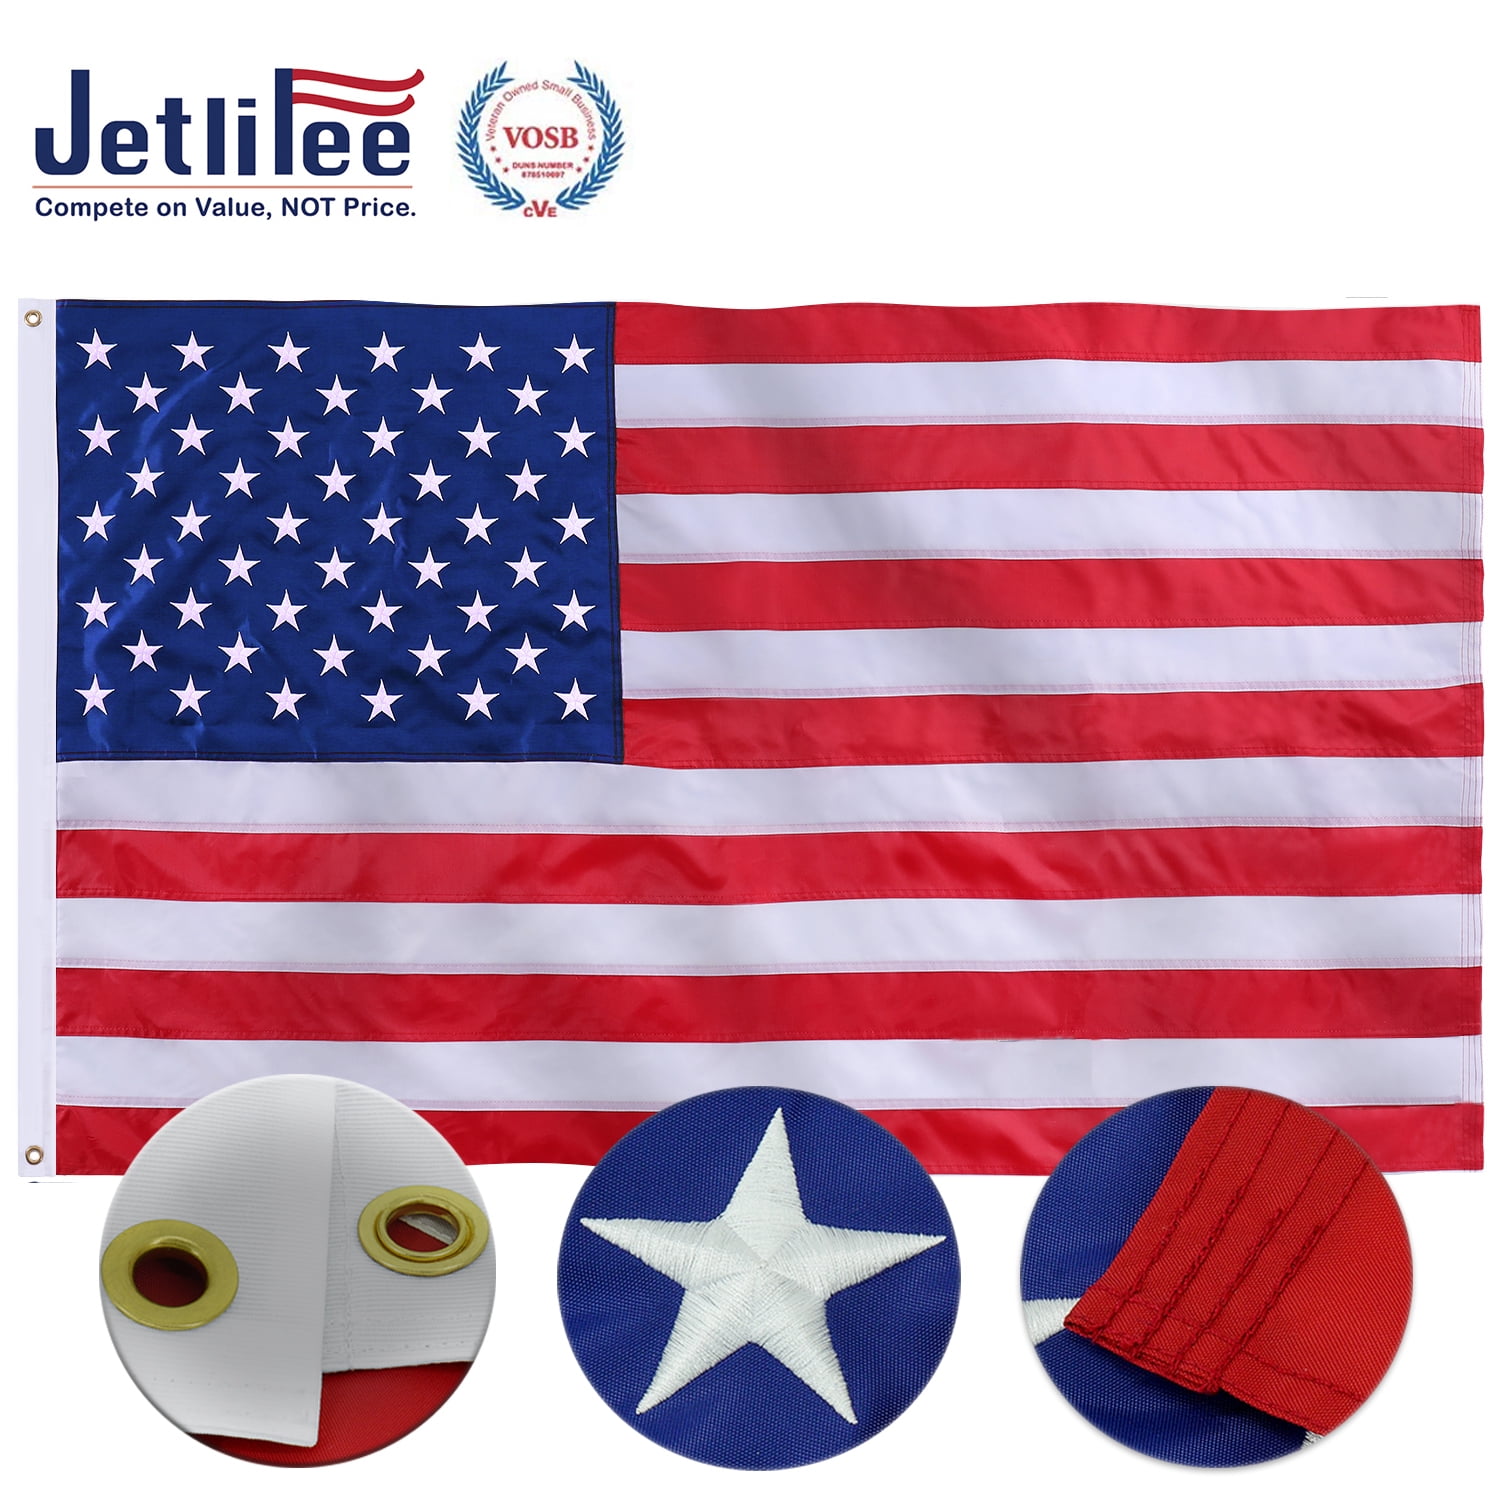 UV Protected and Sewn Using Quadruple Lock Stitching on Fly End Long Lasting Nylon Built for Outdoor Use 100% US Made Texas Flag 3x5 ft Tough Embroidered Star